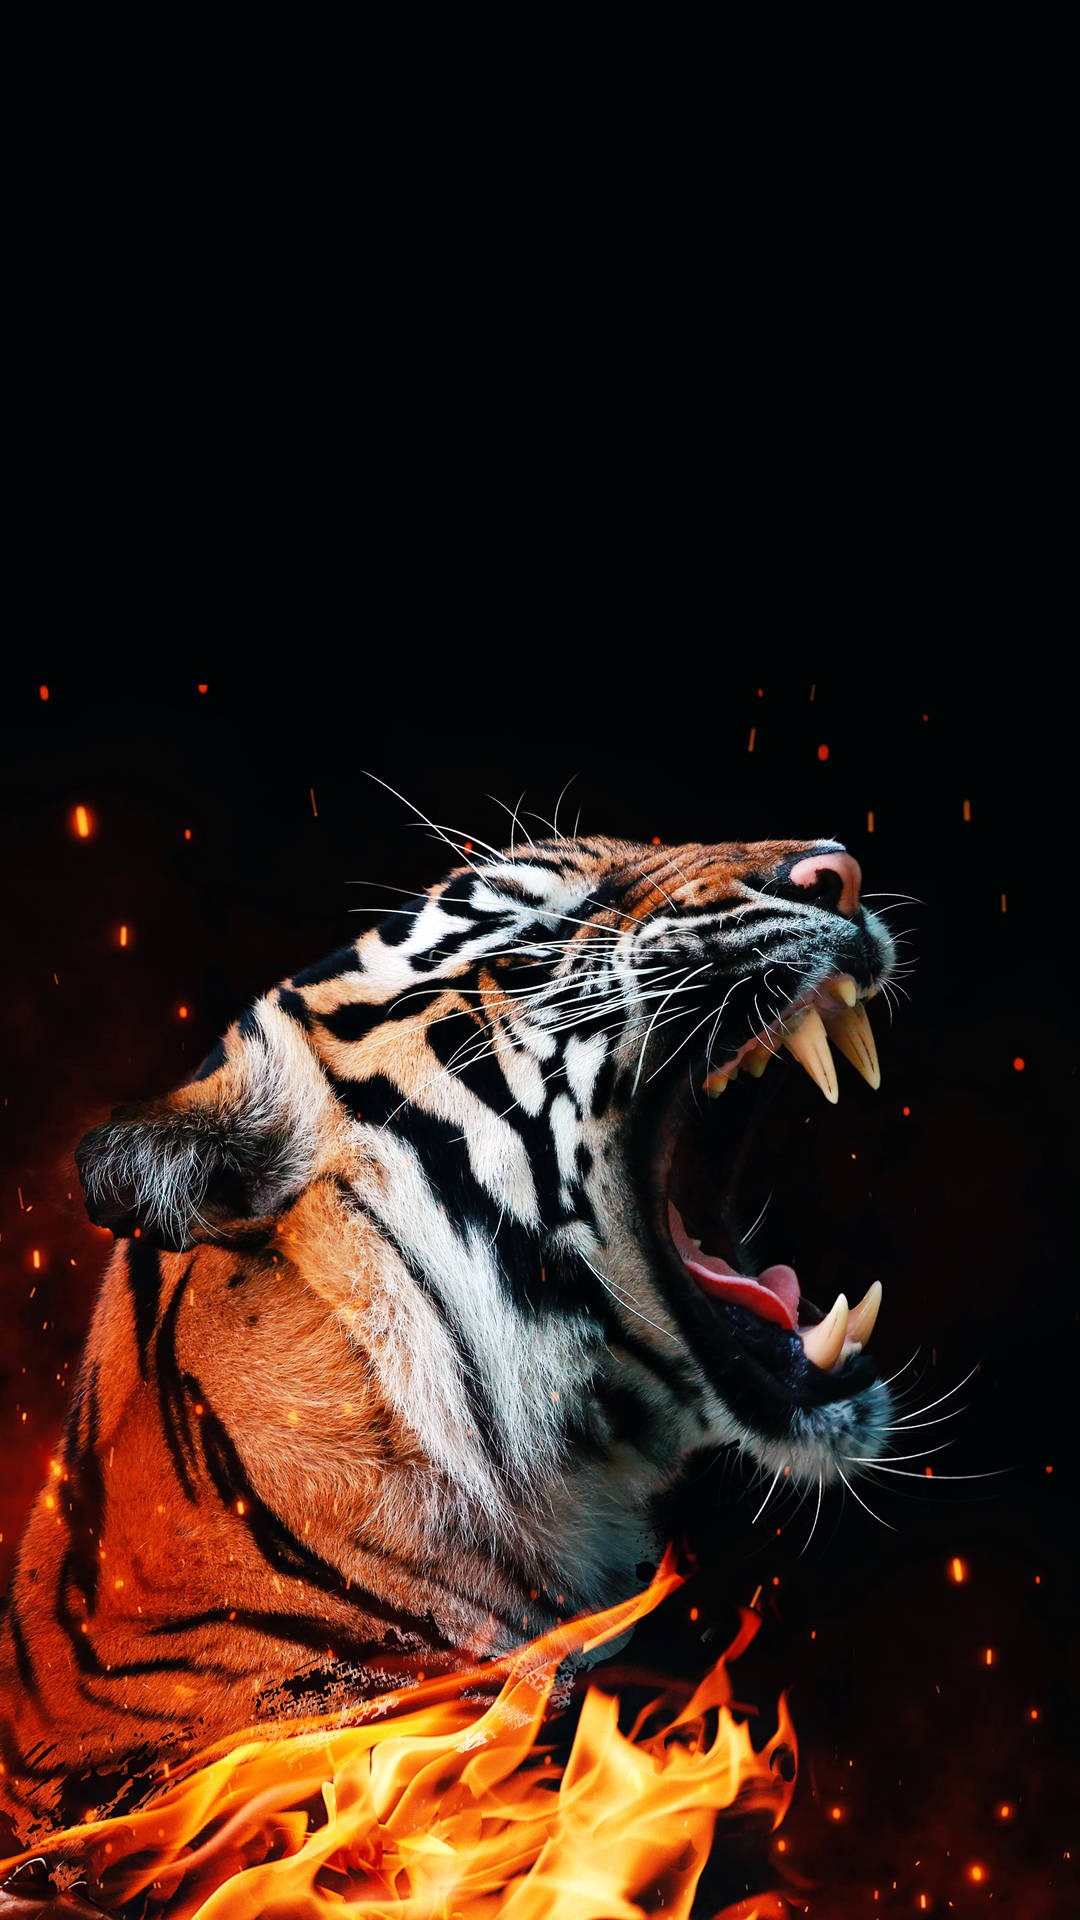 Cool Tiger Photo In Fire Picture